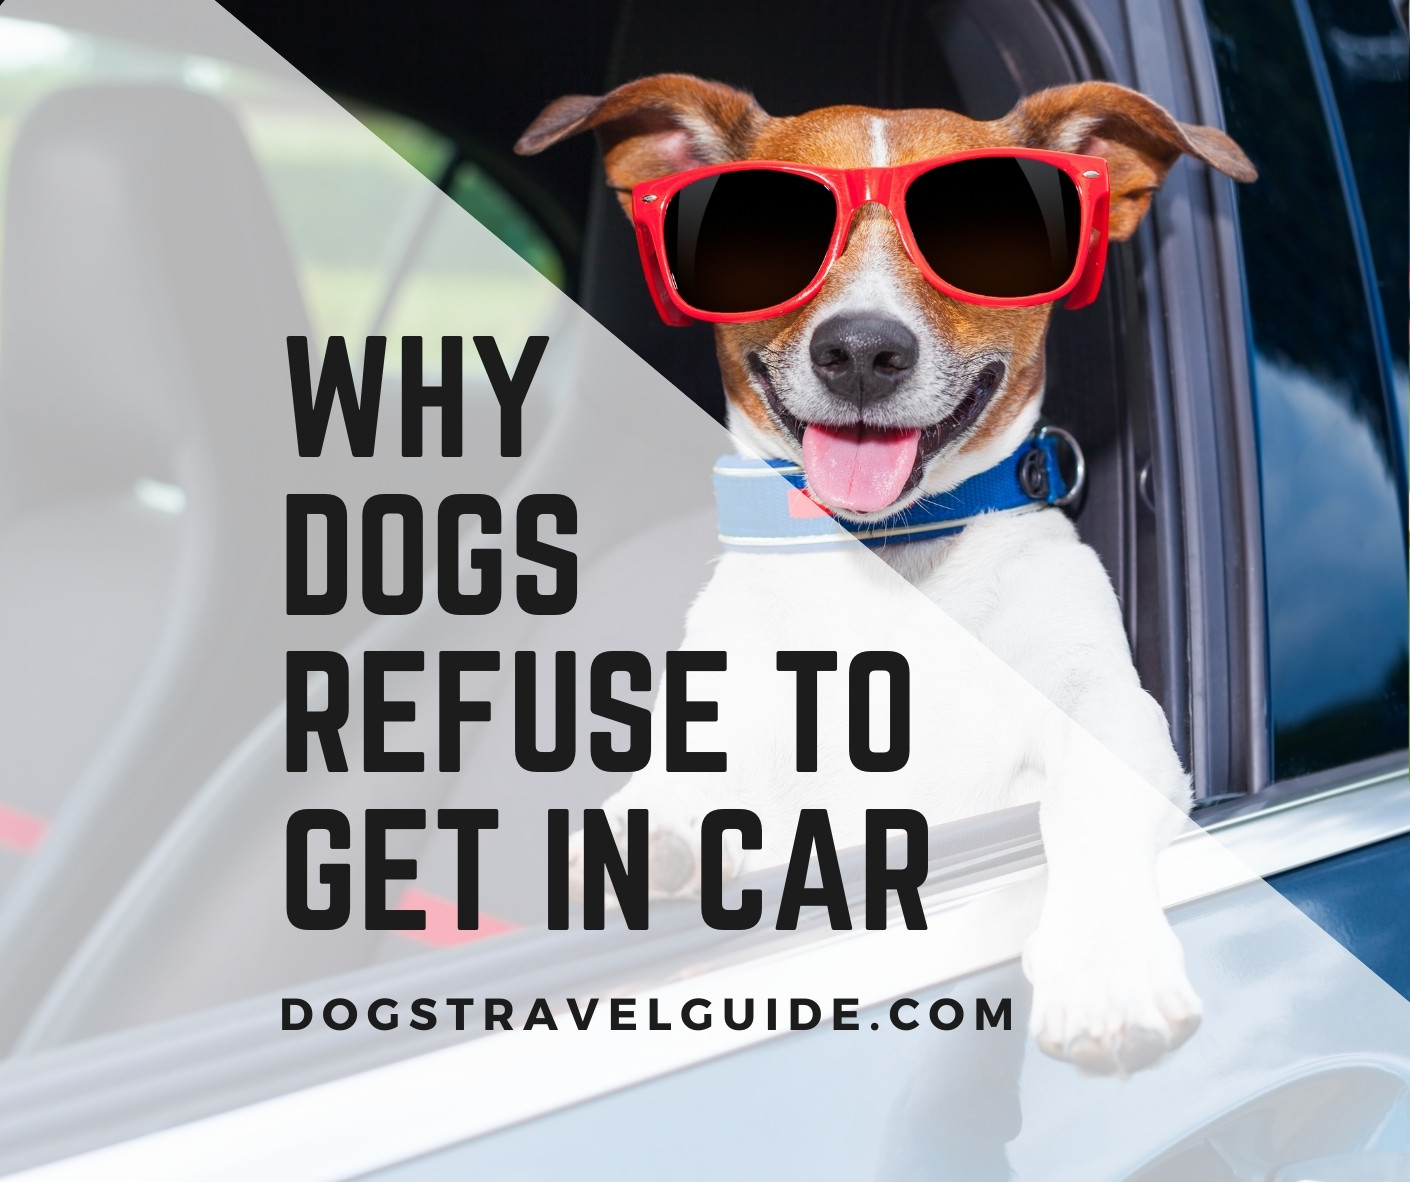 Dog Refusing To Get Into Car: 6 Reasons Why! - Dogs Travel Guide